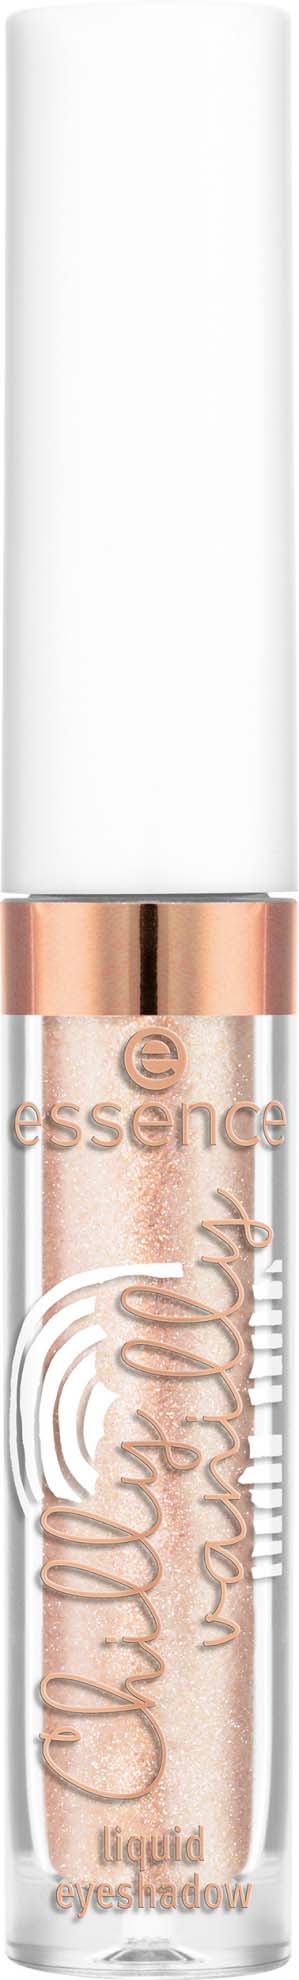 essence Chilly Vanilly Liquid Eyeshadow 02 Vanilla Vibes Only!